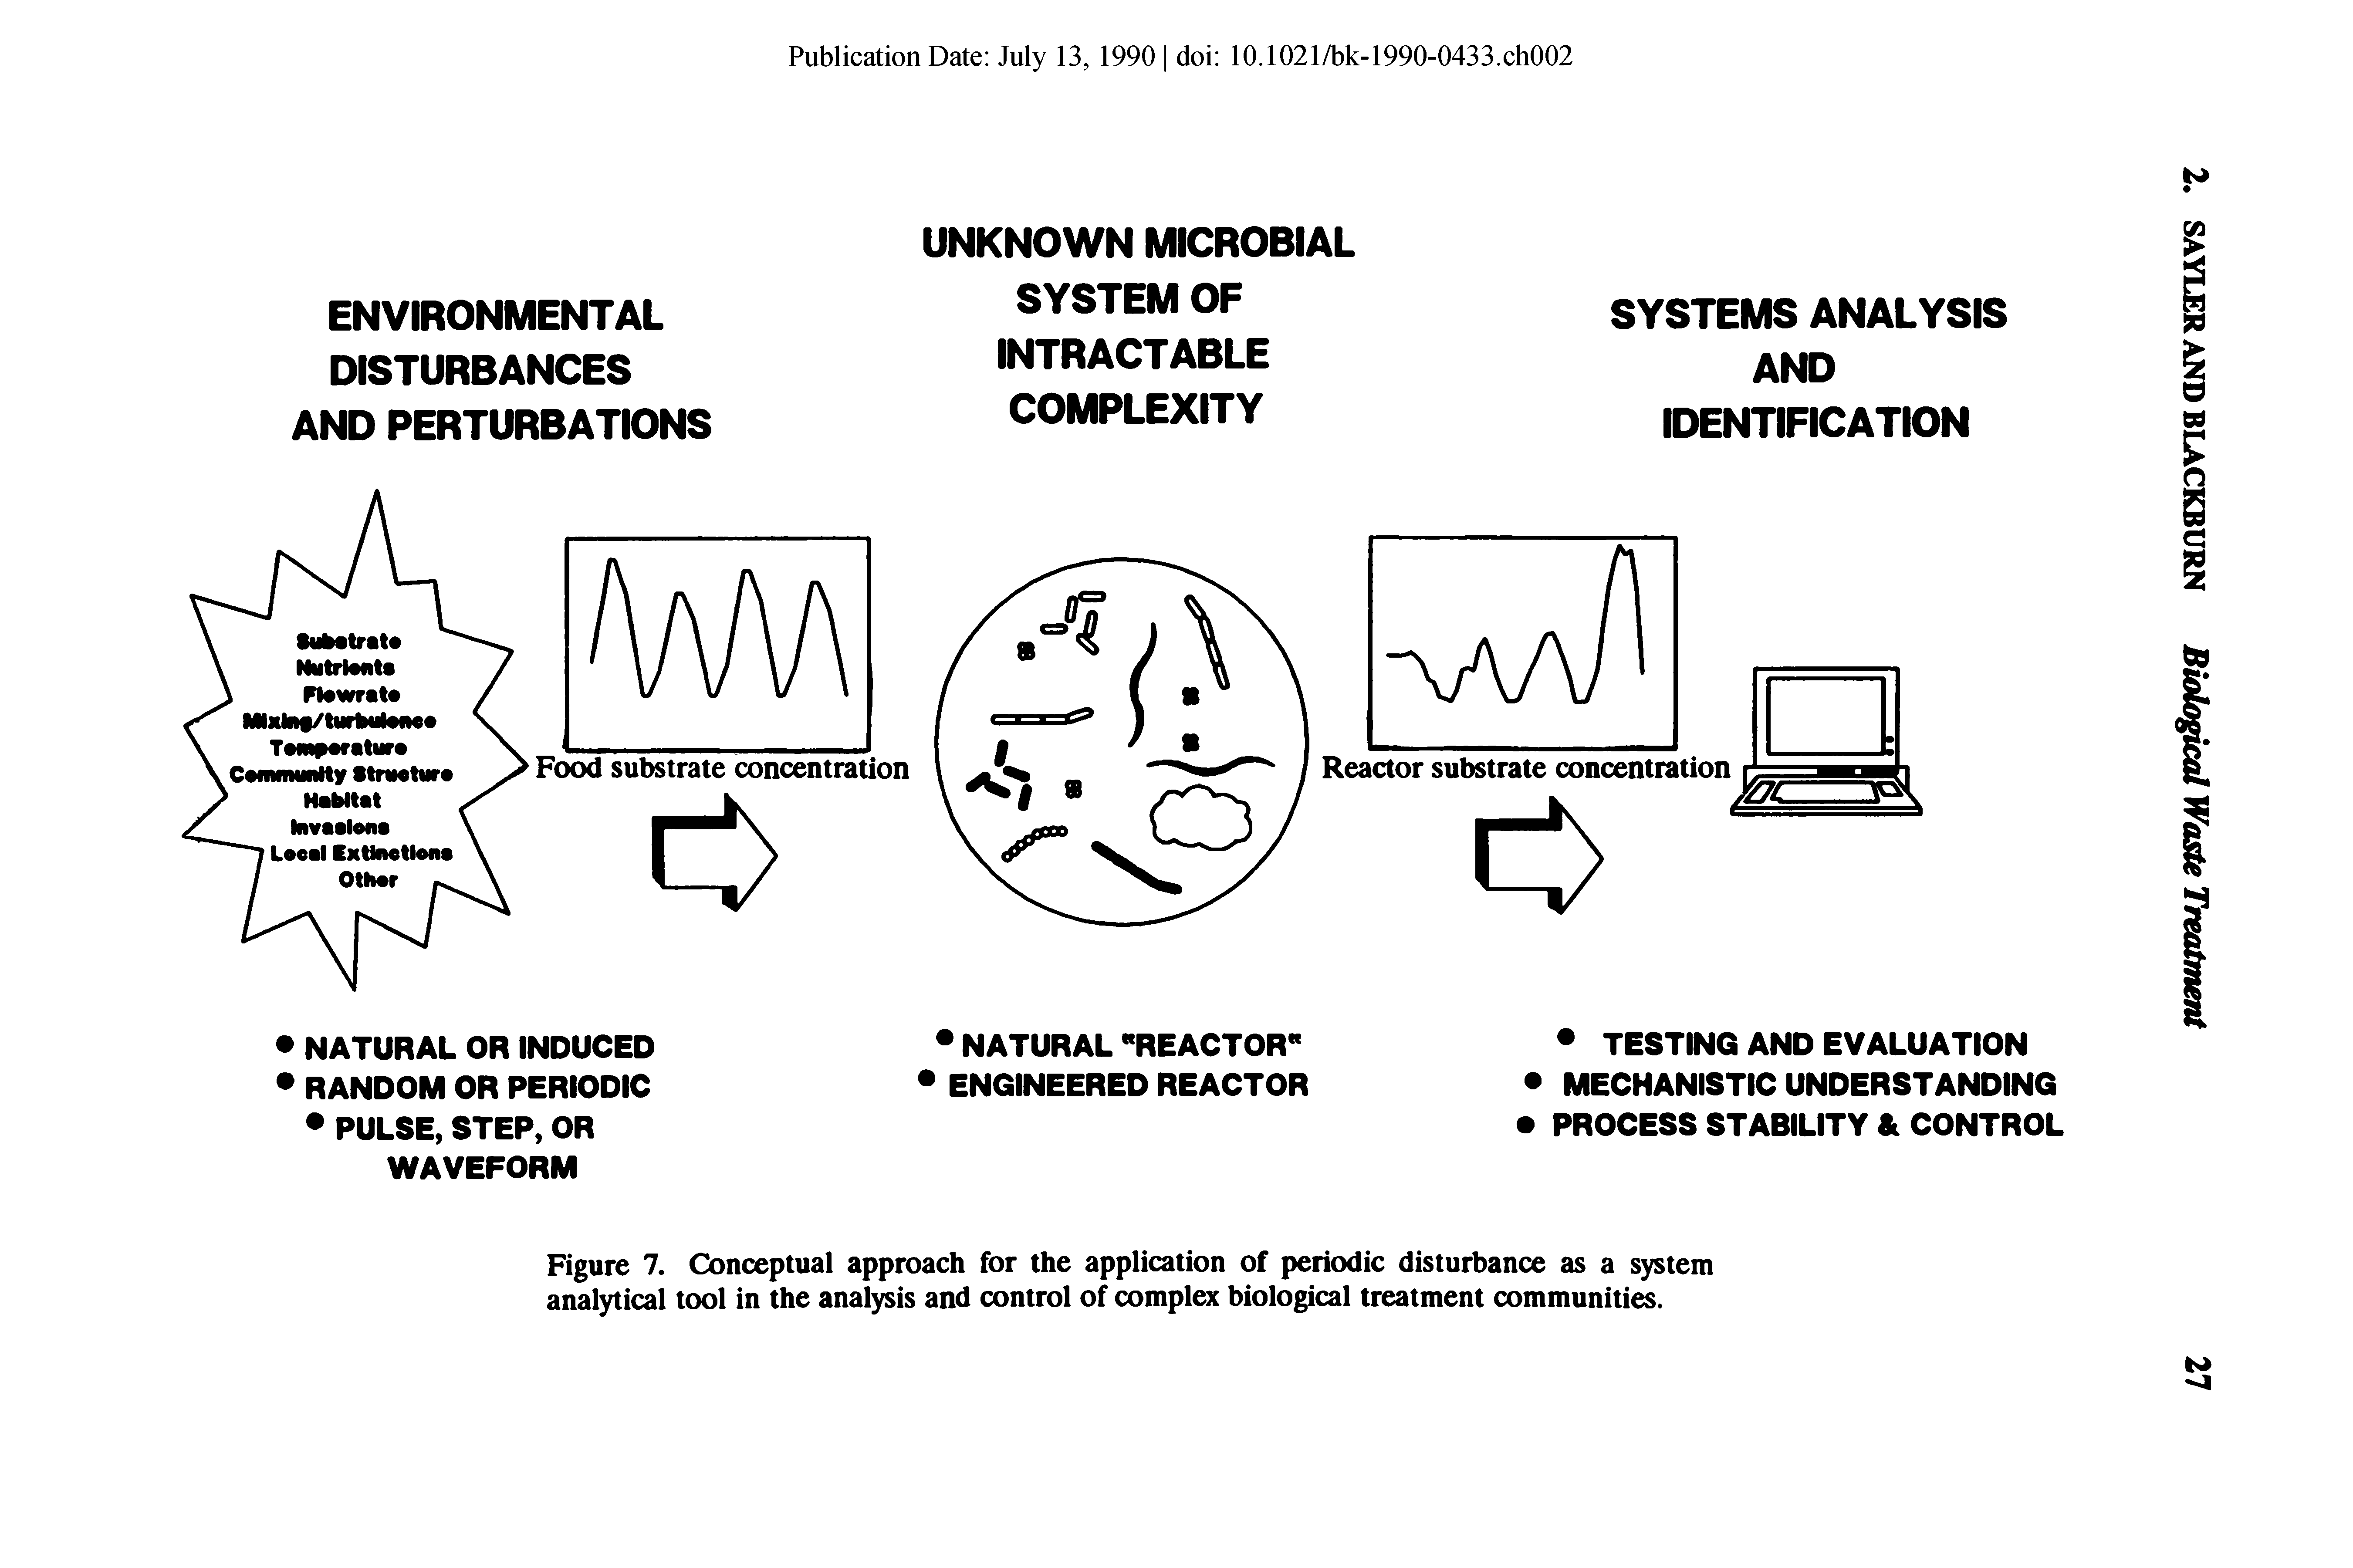 Figure 7. Conceptual approach for the application of periodic disturbance as a system analytical tool in the analysis and control of complex biological treatment communities.